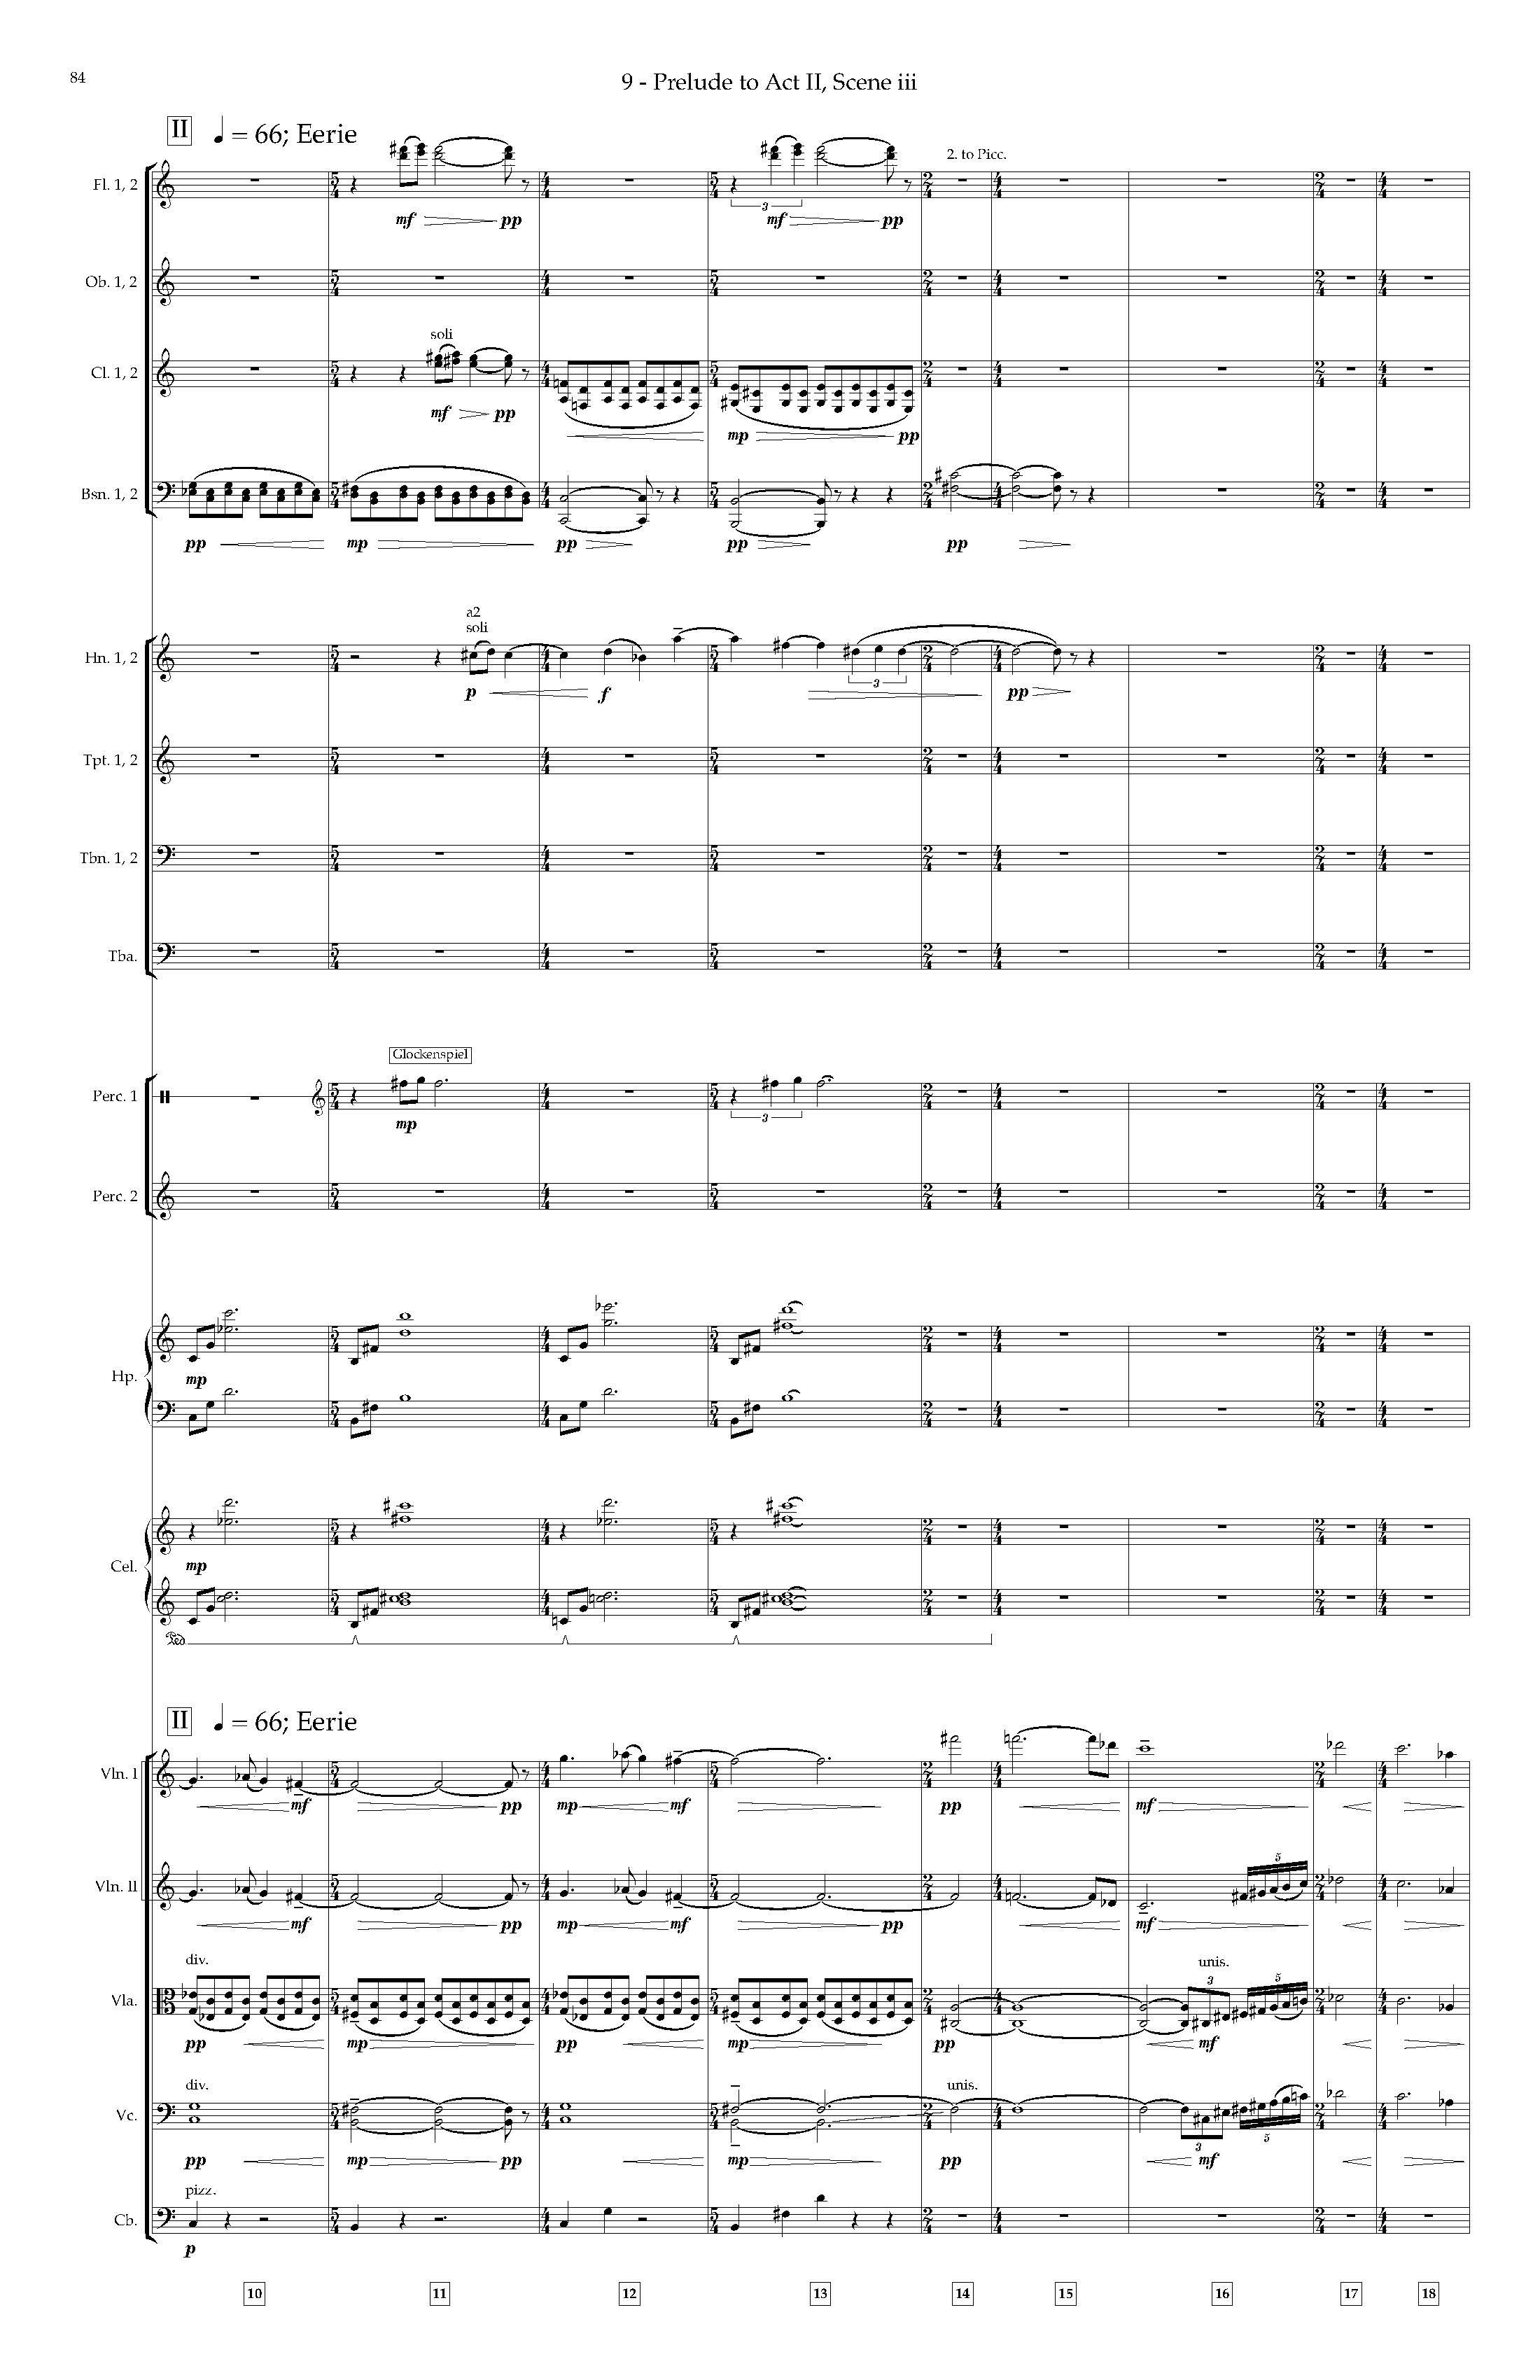 Arias and Interludes from HWGS - Complete Score_Page_90.jpg